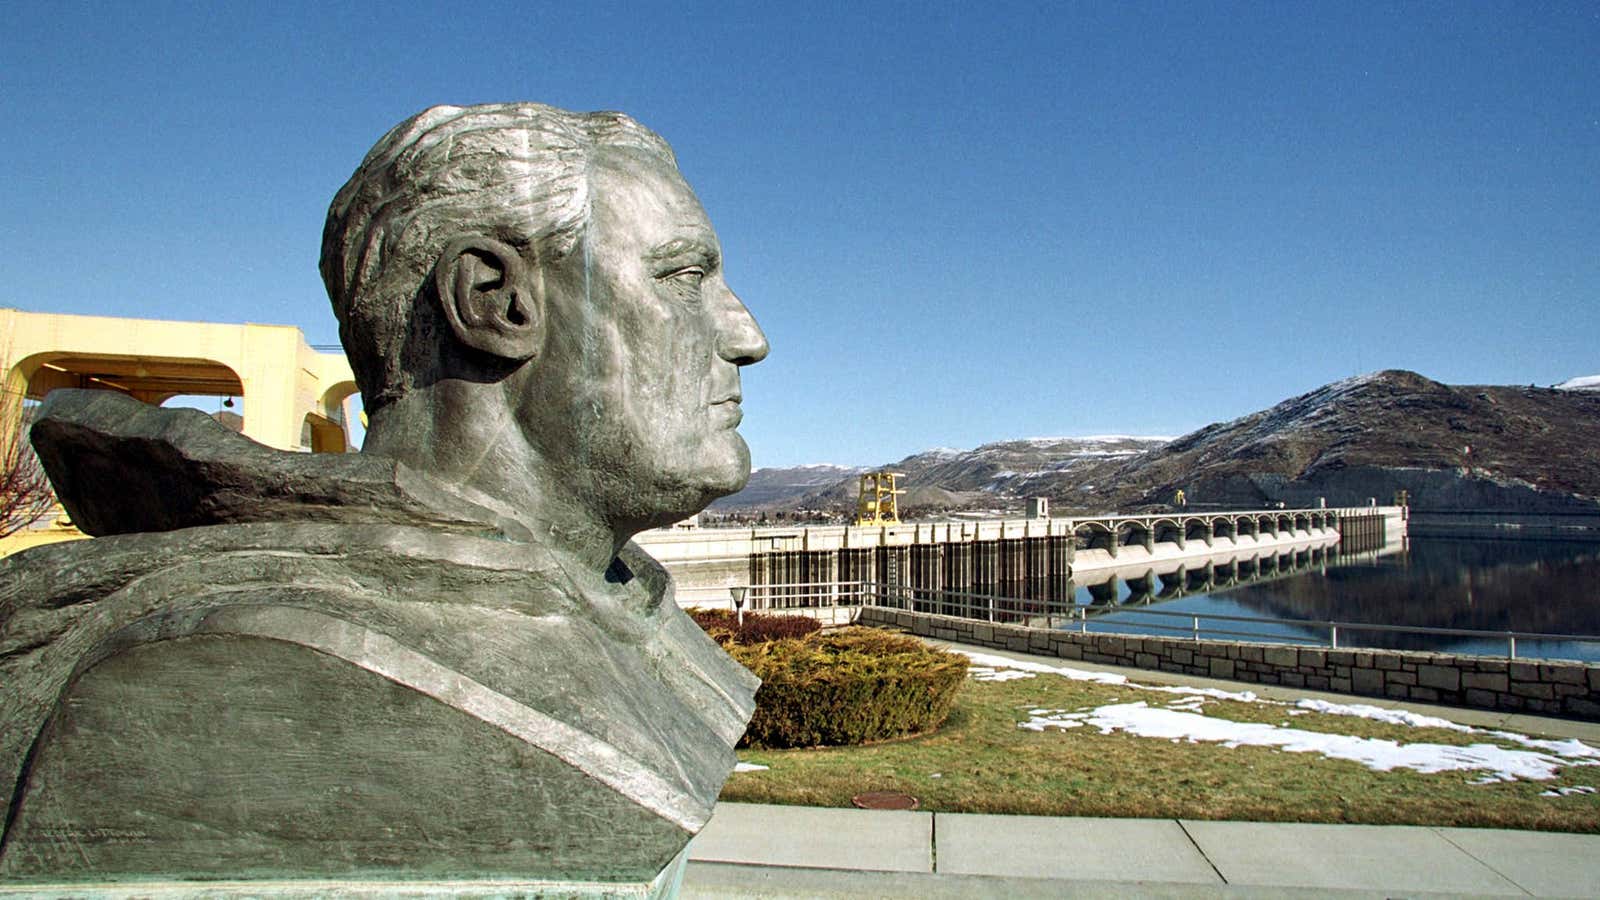 The Grand Coulee Dam: A New Deal project